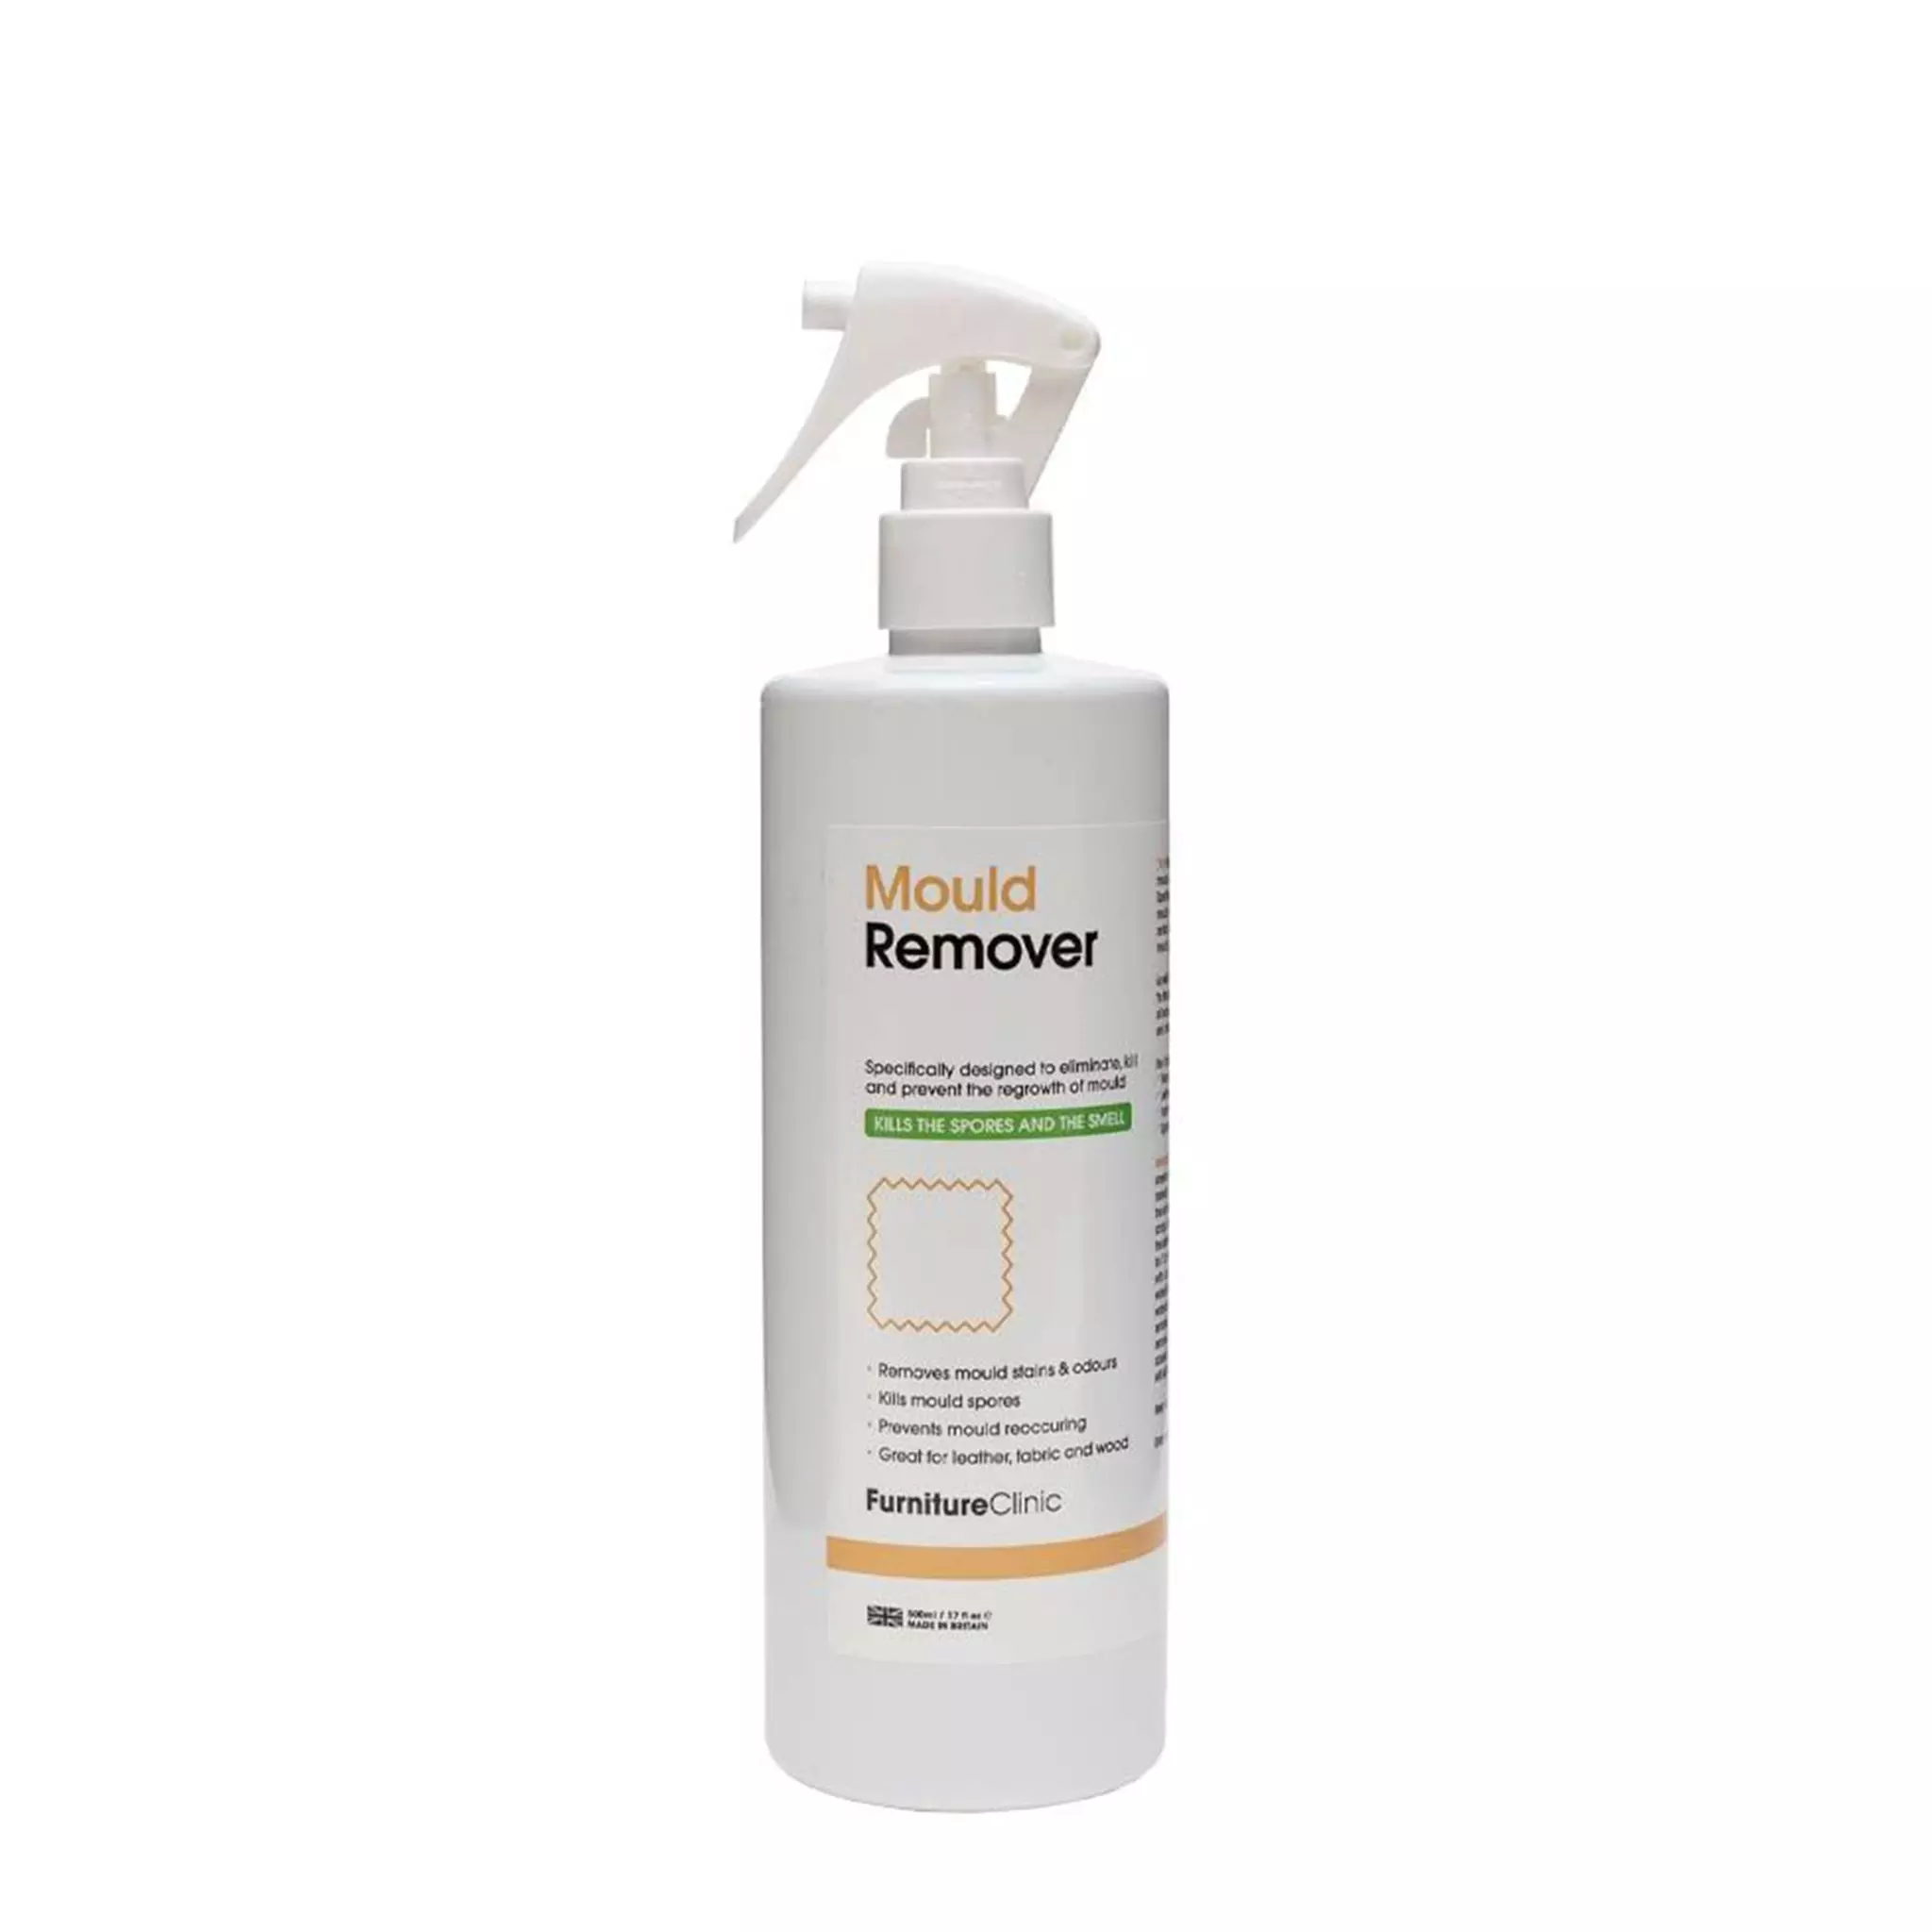 Homeenpoistoaine Furniture Clinic Mould Remover, Ml